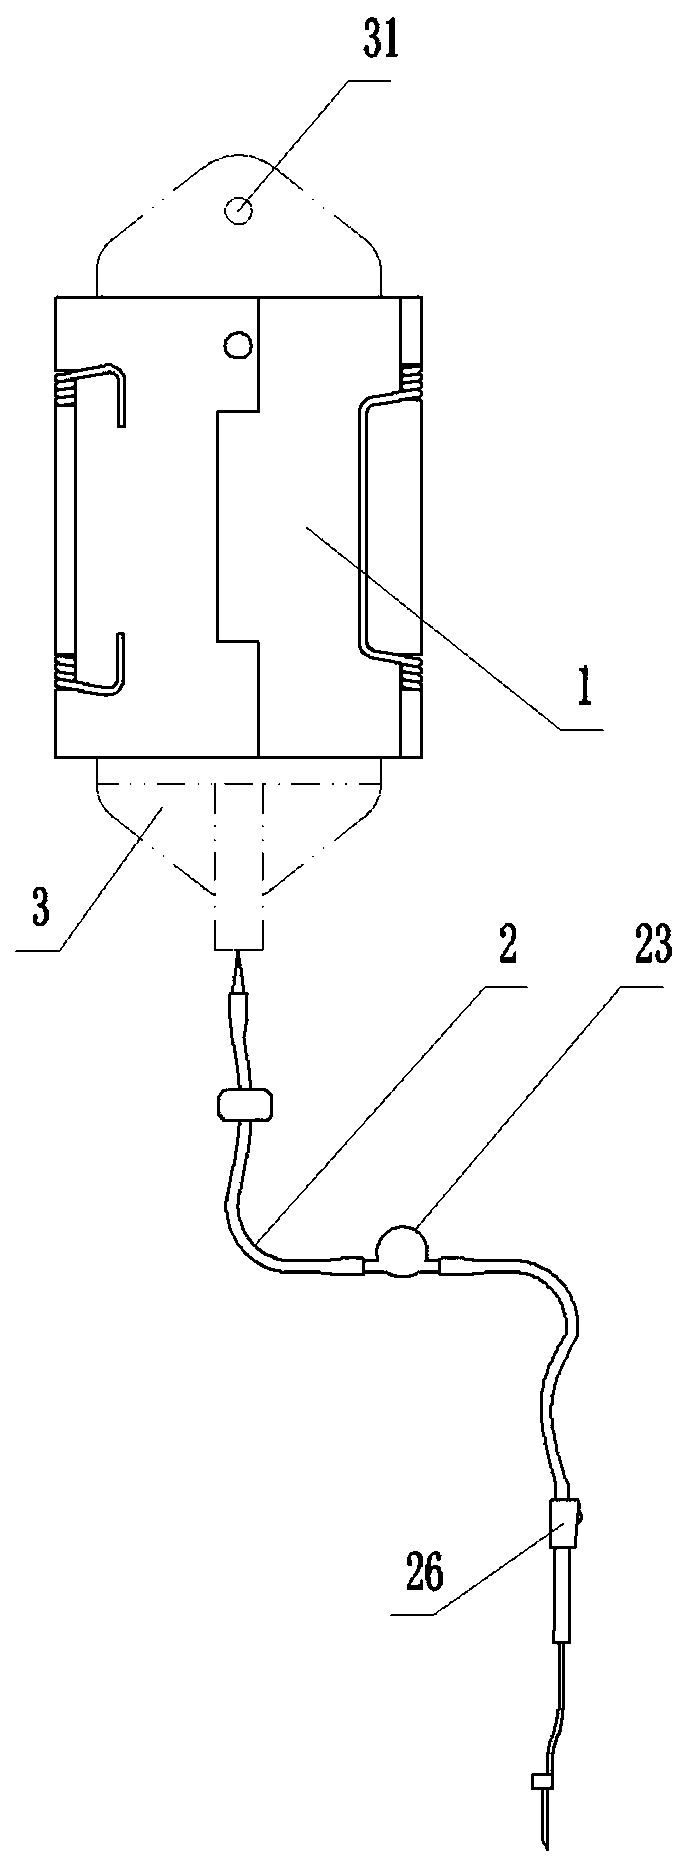 A portable automatic pressurized infusion device